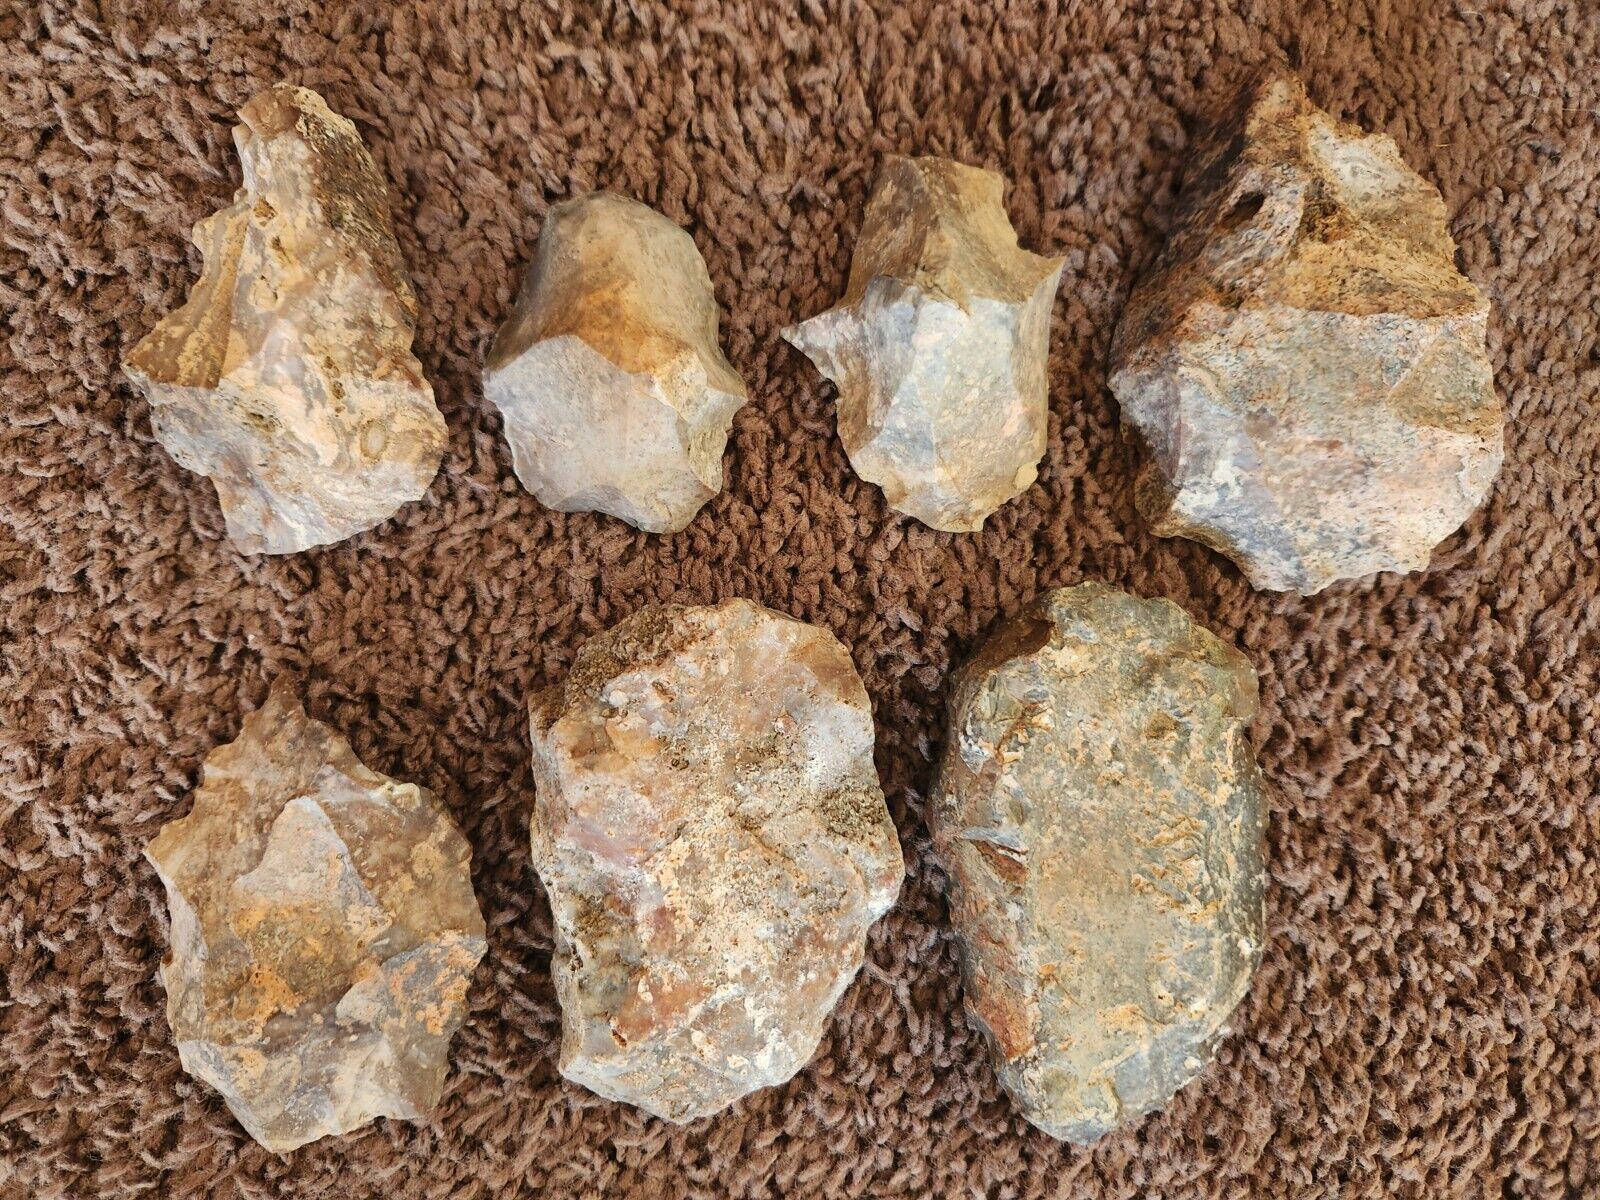  7 Mojave  Desert EARLY MAN PALEOLITHIC HAND AXES STONE ARTIFACTS Pre Clovis OLD